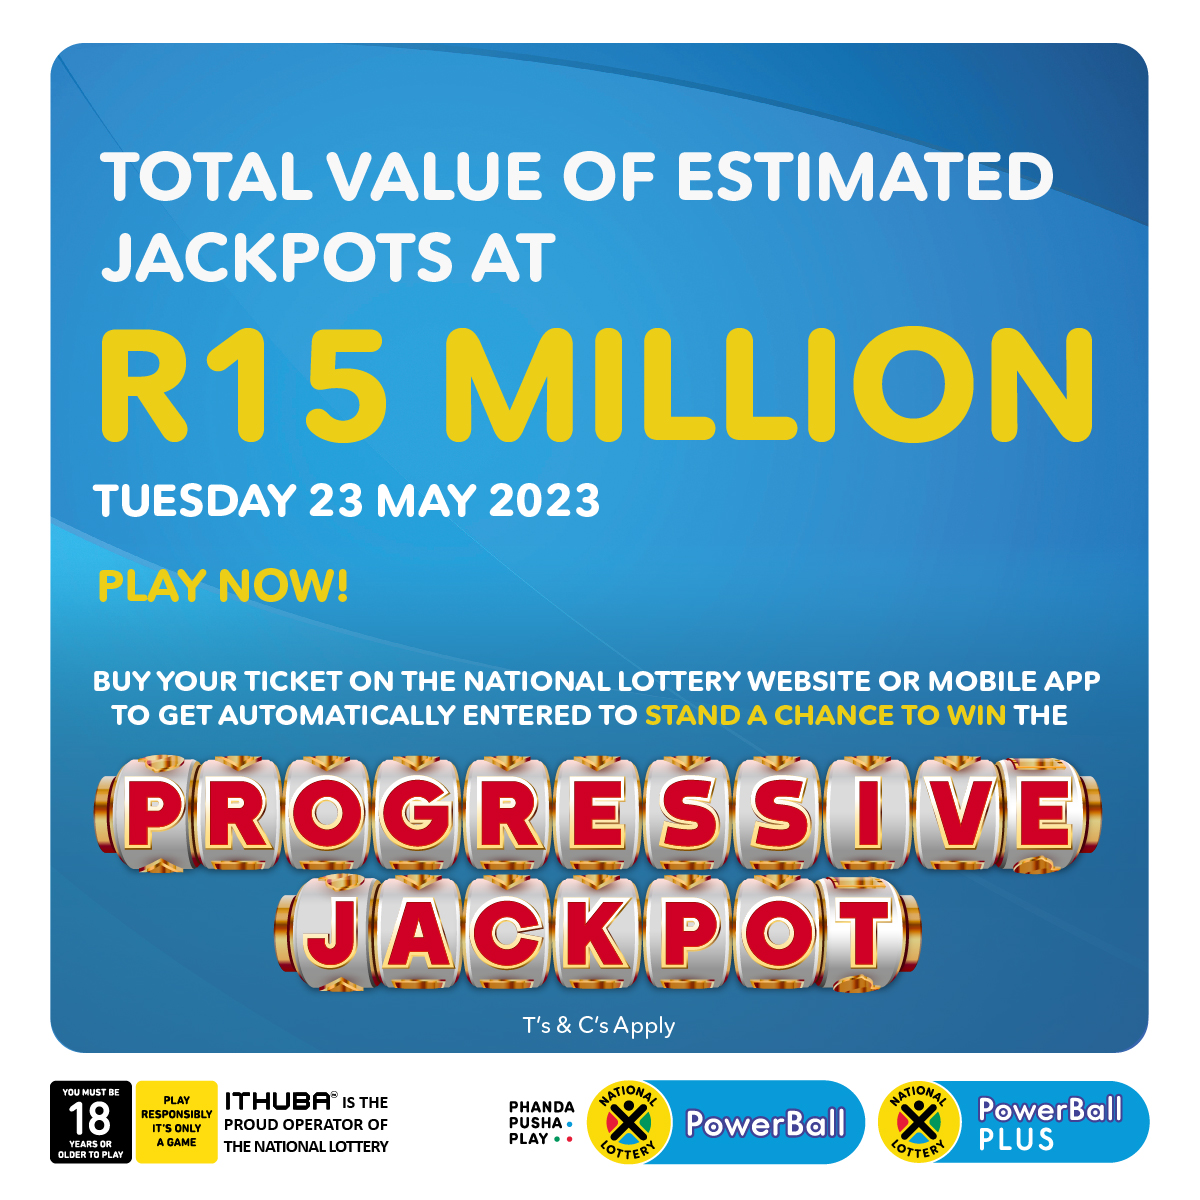 The #ProgressiveJackpot has had a total of 8 winners since the start of the competition! 5 winners won after playing #PowerBall! Play #PowerBall & #PowerBallPLUS on https://t.co/cpnkKF7OMO, or the Mobile App for automatic entry into the #ProgressiveJackpot! T's & C's Apply. https://t.co/OX7OpzhPFx